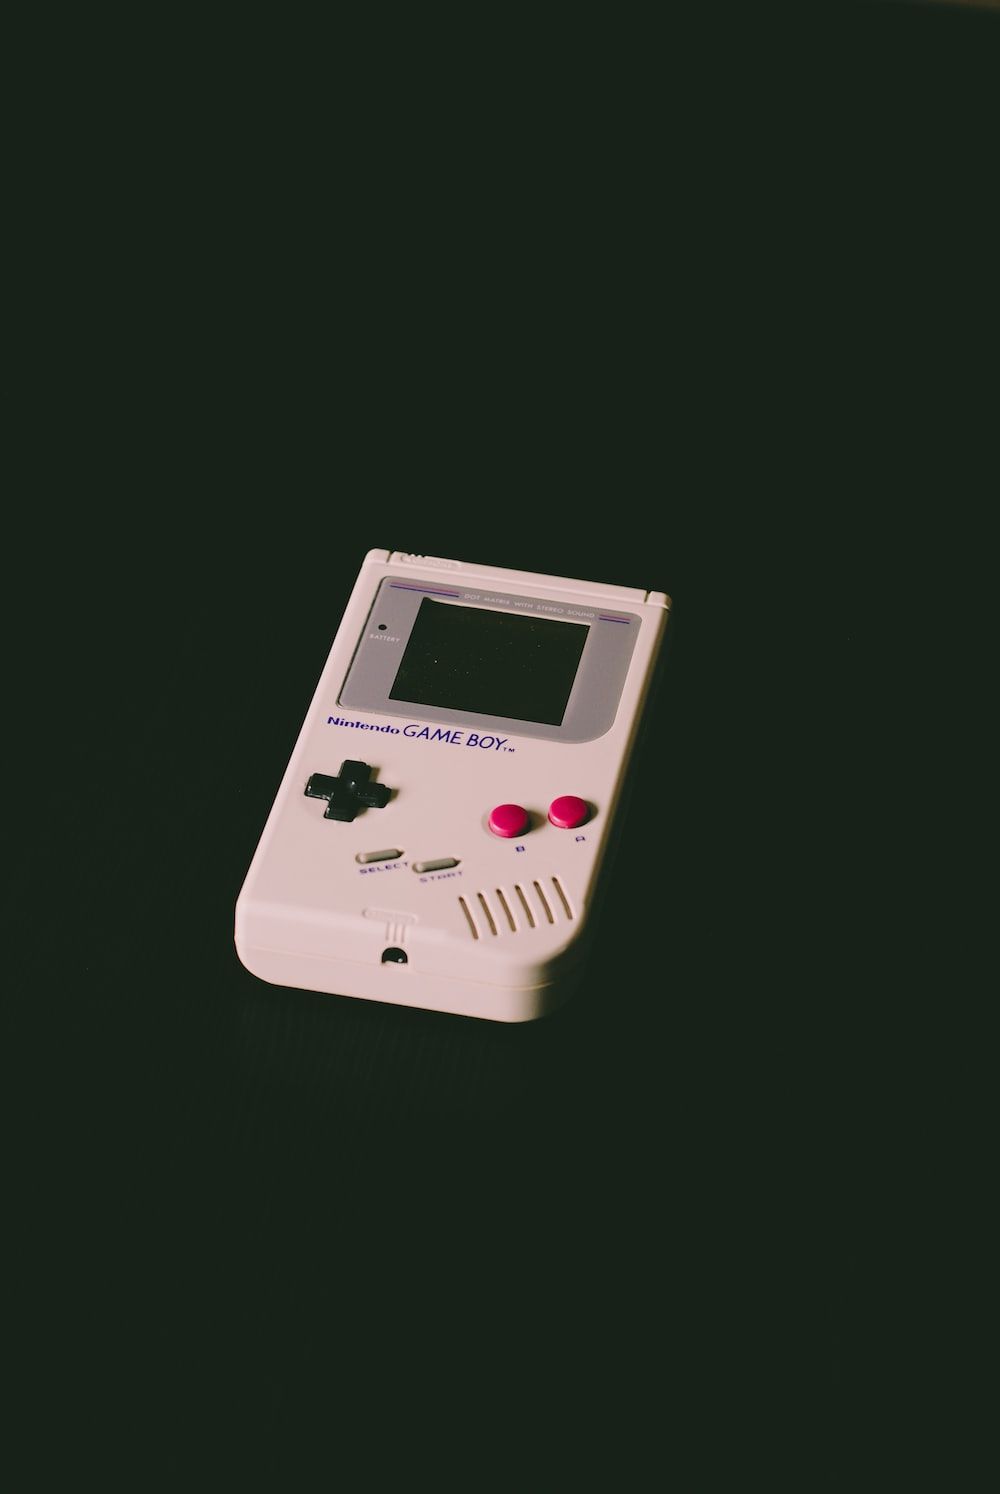 A small game boy is sitting on the table - Nintendo, Game Boy